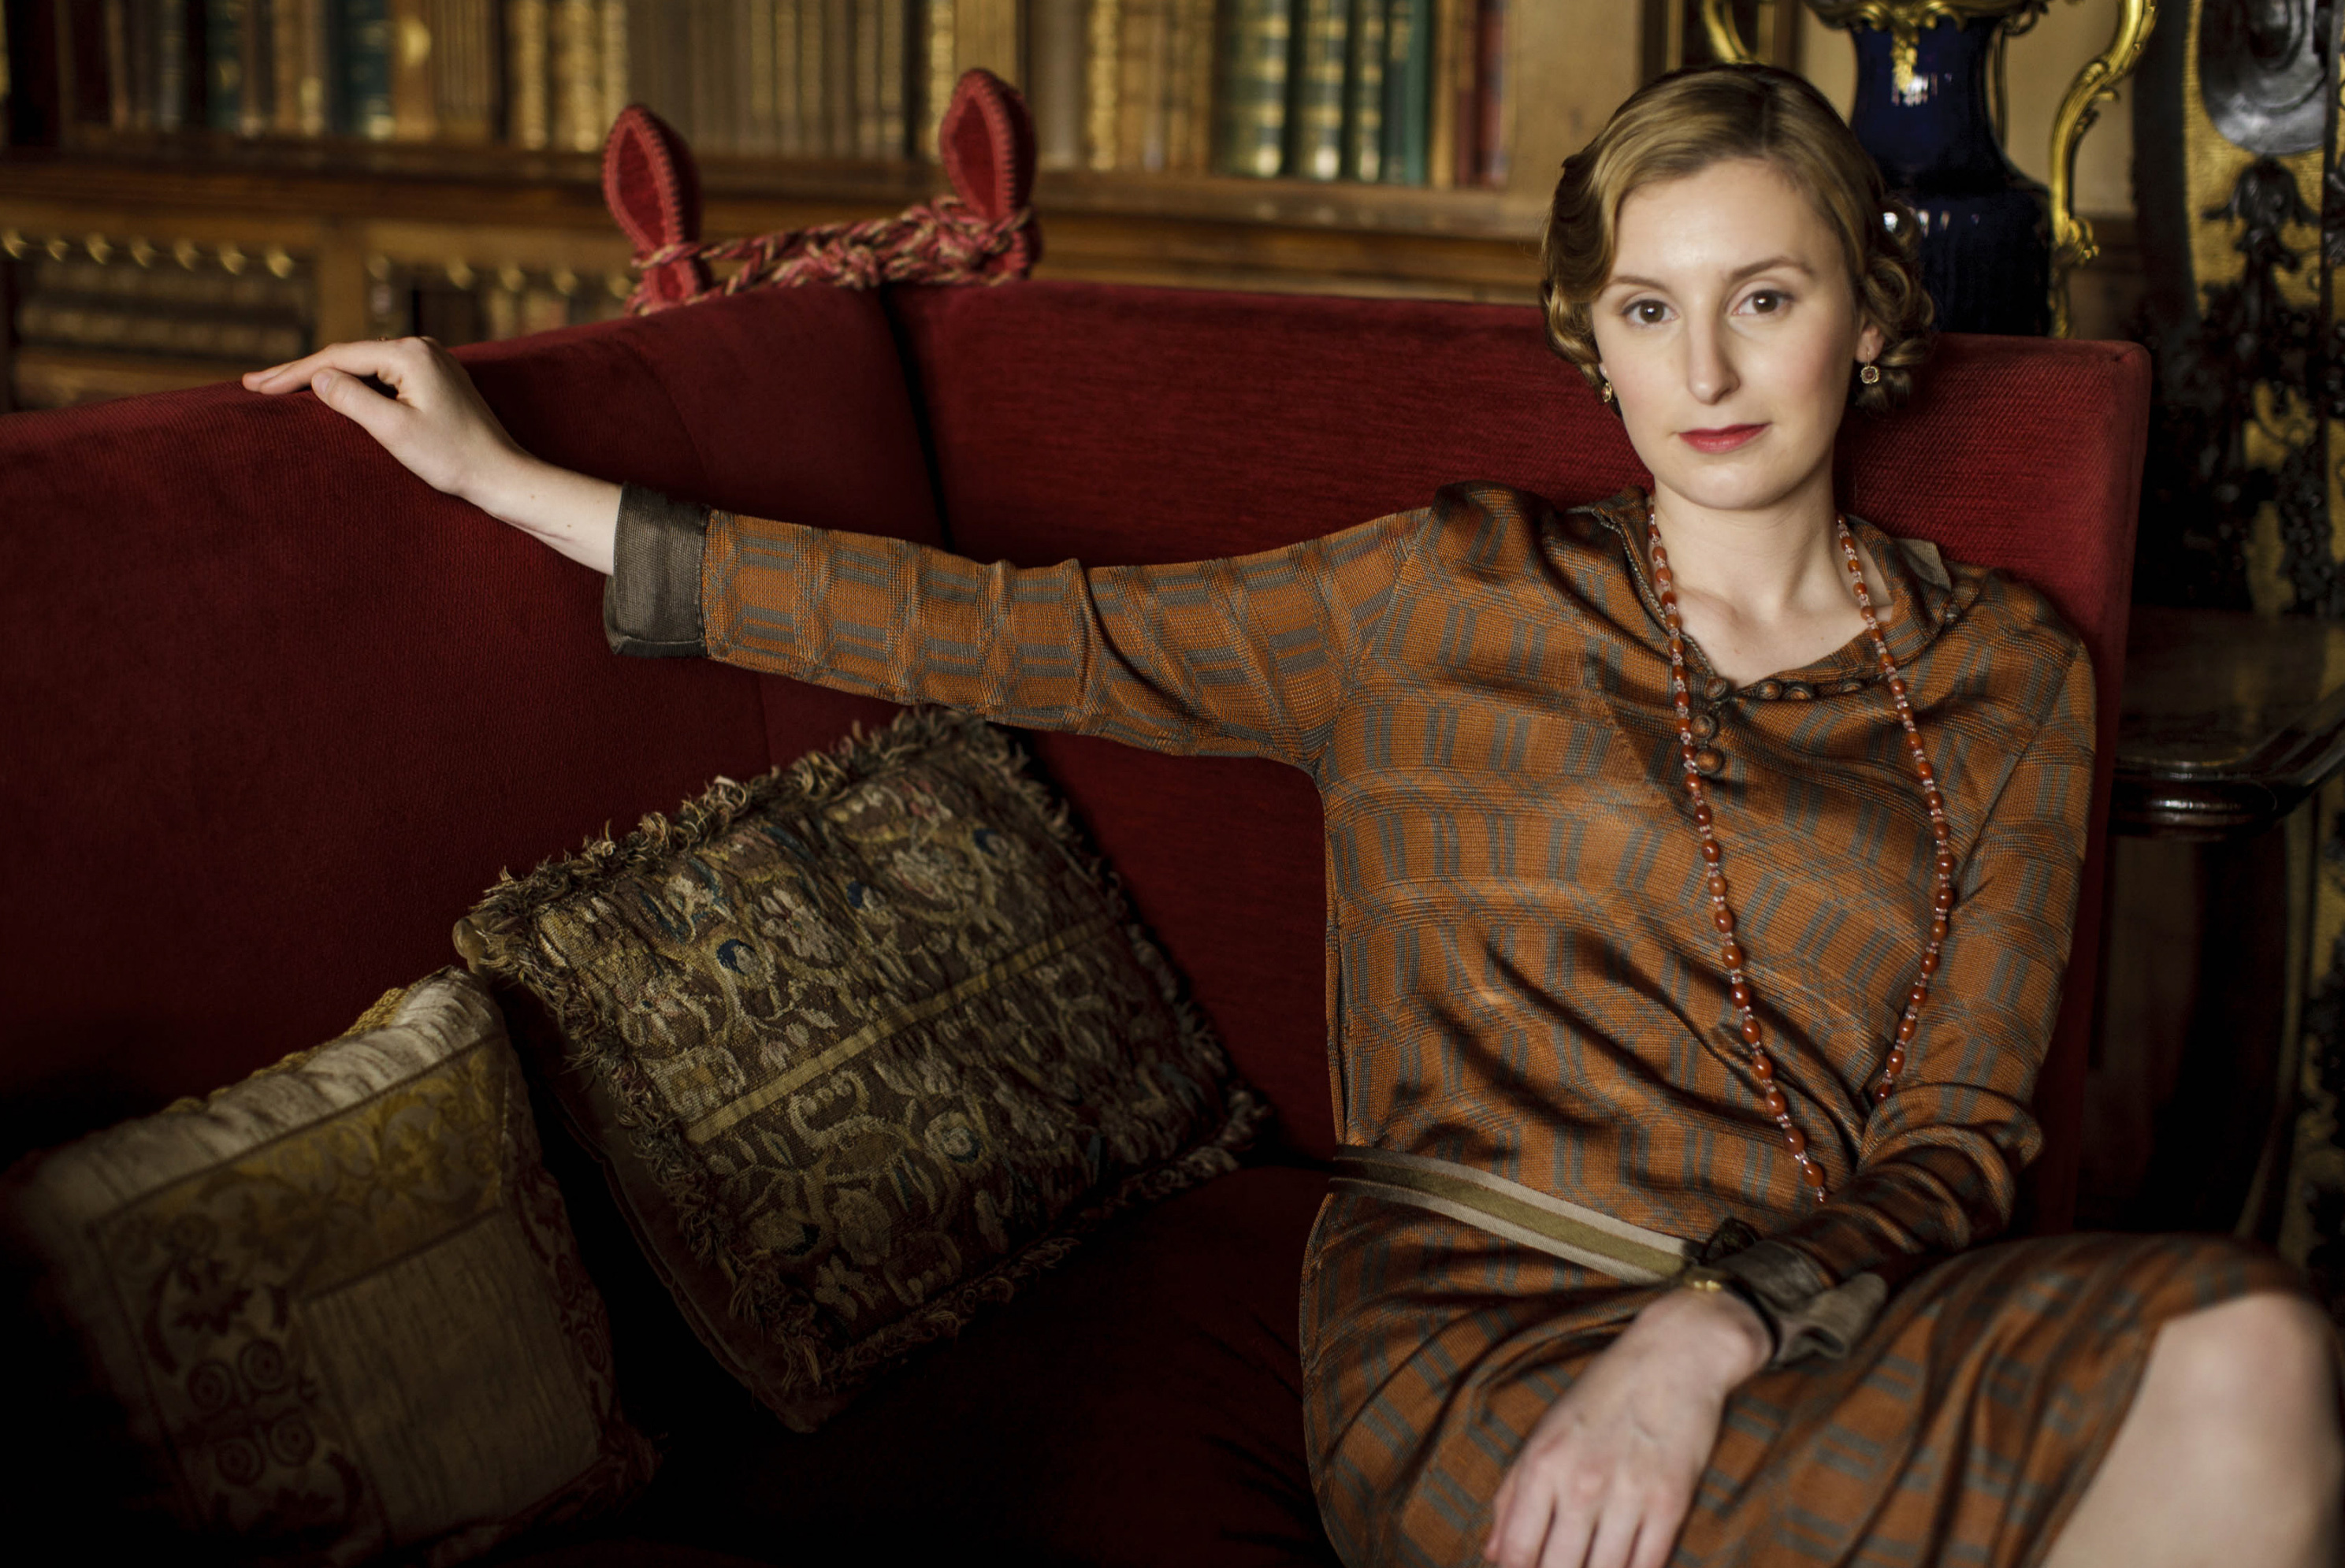 <p>Lady Edith (played by Laura Carmichael) is seen here on season 5 of "Downton Abbey" in a patterned orange and green-brown dress. "I think that [Edith] can be quite edgy and quite alternative and she wears interesting colors," costume designer Anna Mary Scott Robbins told PBS. "Laura's got an incredible complexion and I can put peach and orange and greens on her, autumnal colors that look just wonderful. She can wear a soft palette and a strong palette equally as well so her wardrobe's very varied."</p>